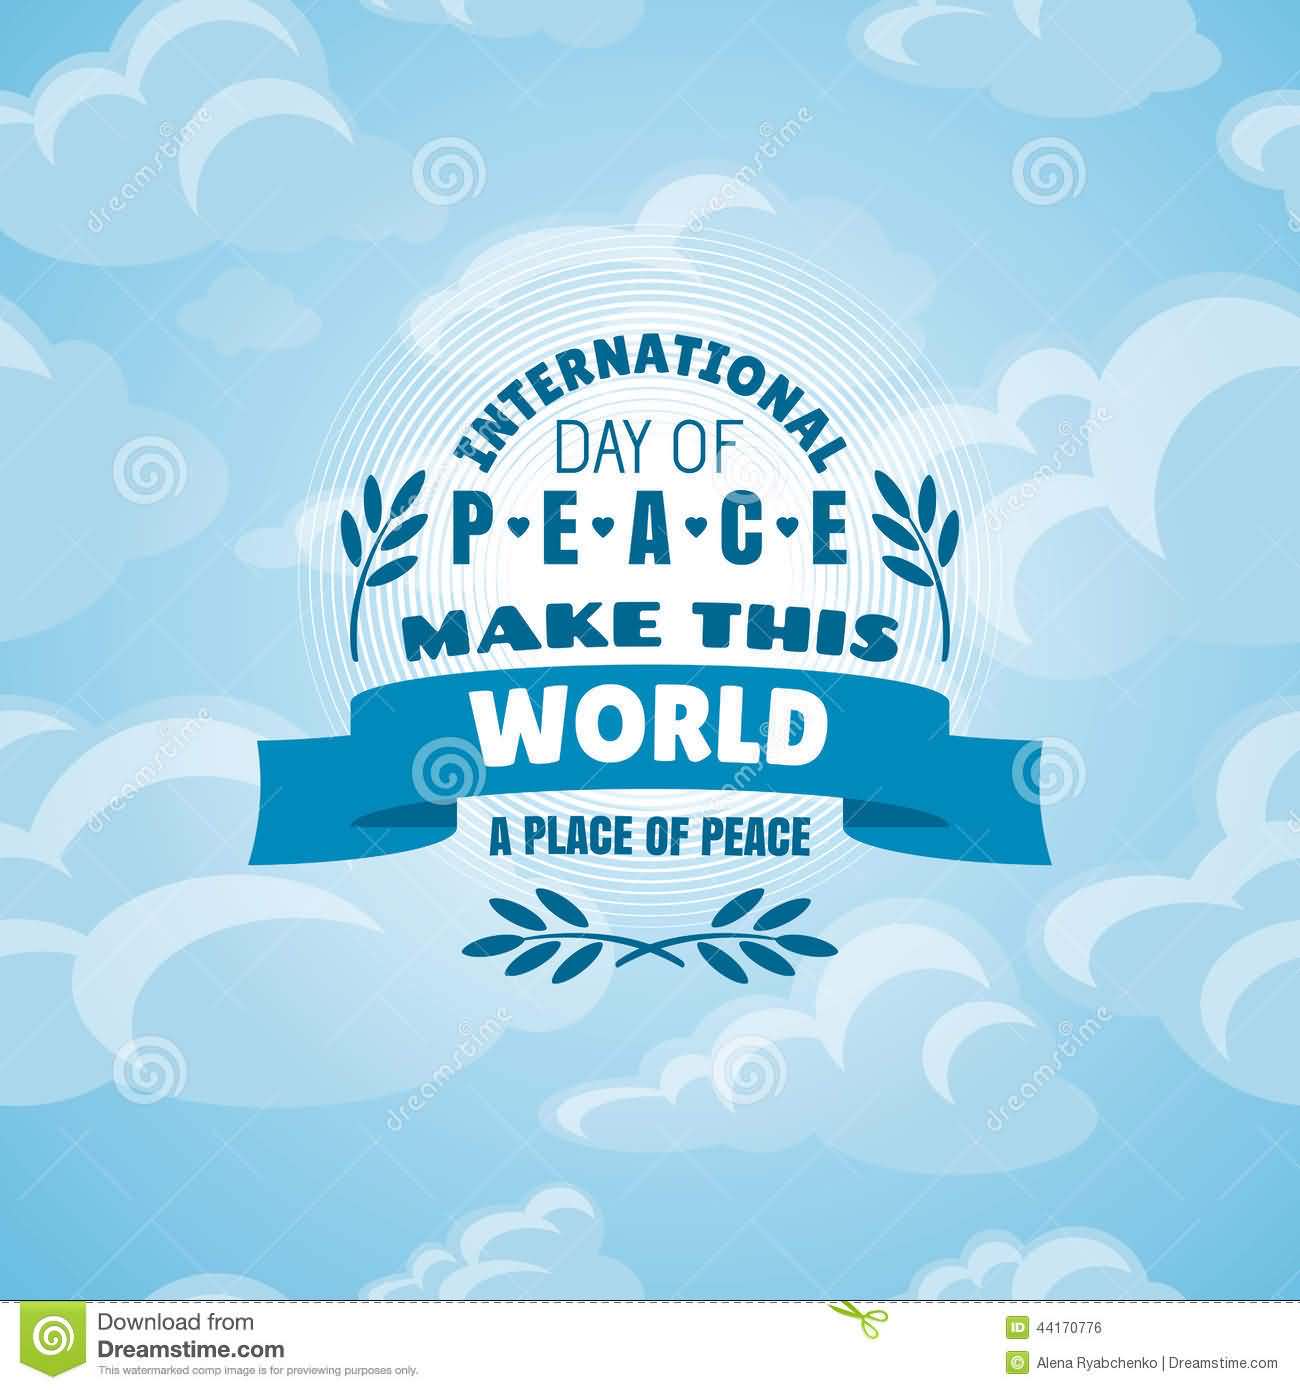 International Day Of Peace Make This World A Pleace Of Peace Illustration